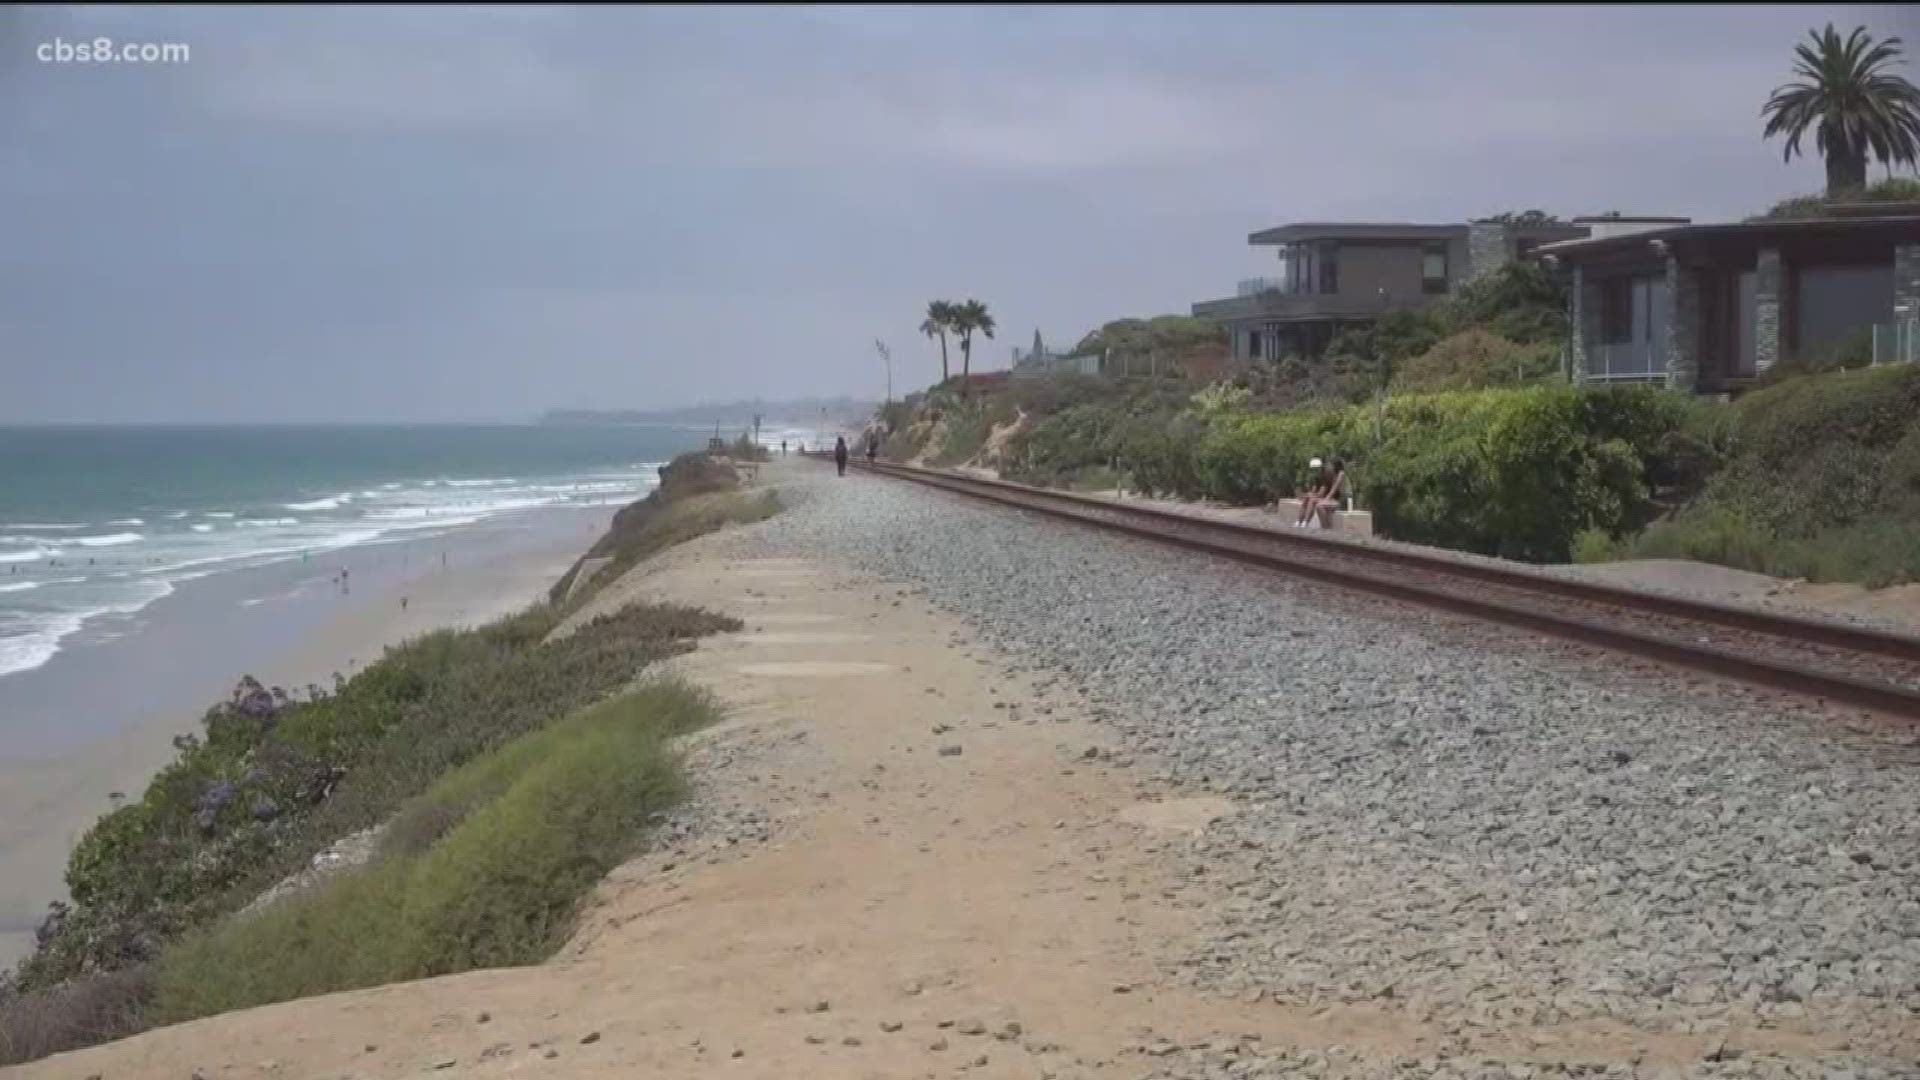 When it comes to the Del Mar cliffs, mother nature is not bluffing. Erosion along the coast is causing the cliff side to crumble – putting train tracks at risk. News 8’s Shawn Styles reports from Del Mar with a look at some possible solutions.